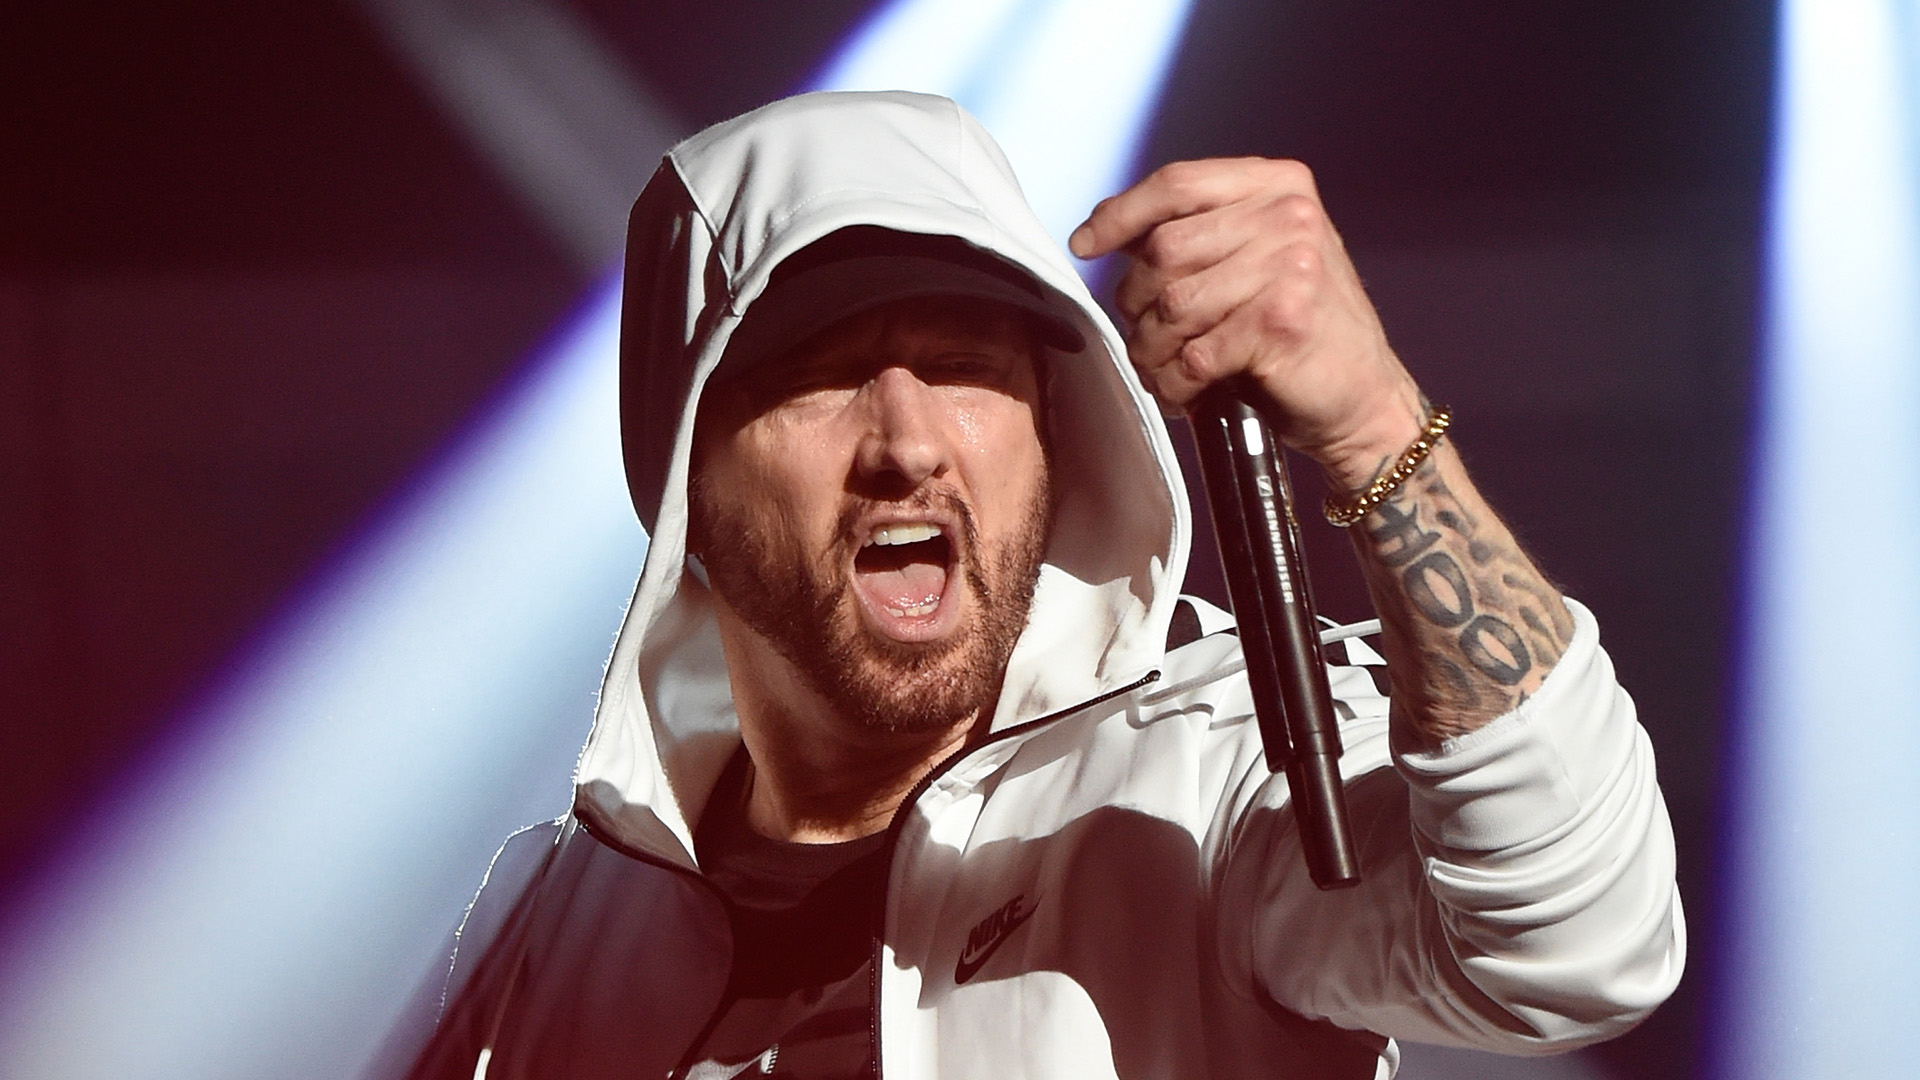 Best Eminem's Live Performances with Supersonic Speed and Most Aggressive Verses